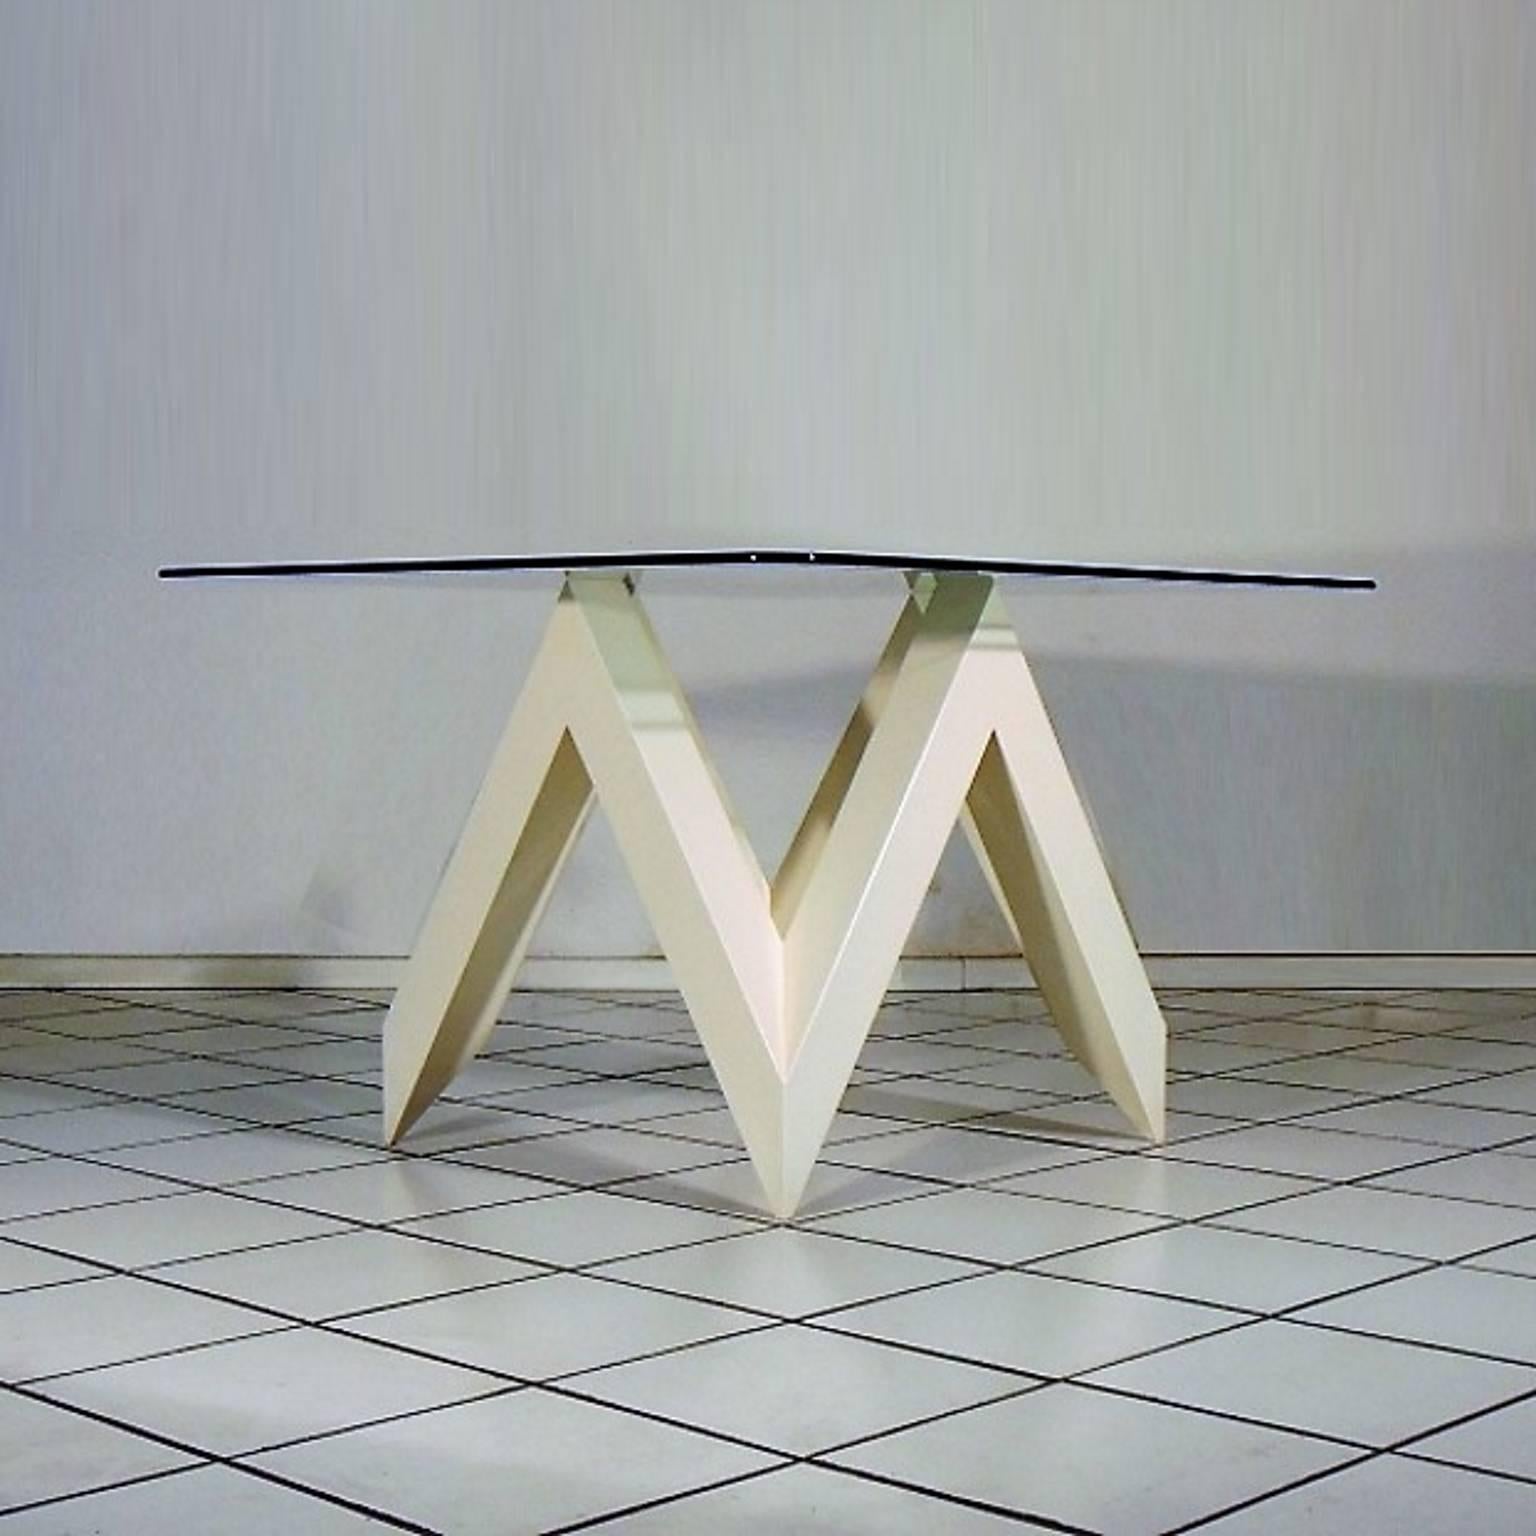 Table with bevelled clear glass top in special square size cm 110 x 110, 12 mm thickness, base cm 69.5 x 69.5 x H 71.5
Total height 72 cm.
Sculptural zig-zag wooden base cm 69.5 x 69.5 x H 71.5 in cream color, with the typical 20-gloss mat lacquer